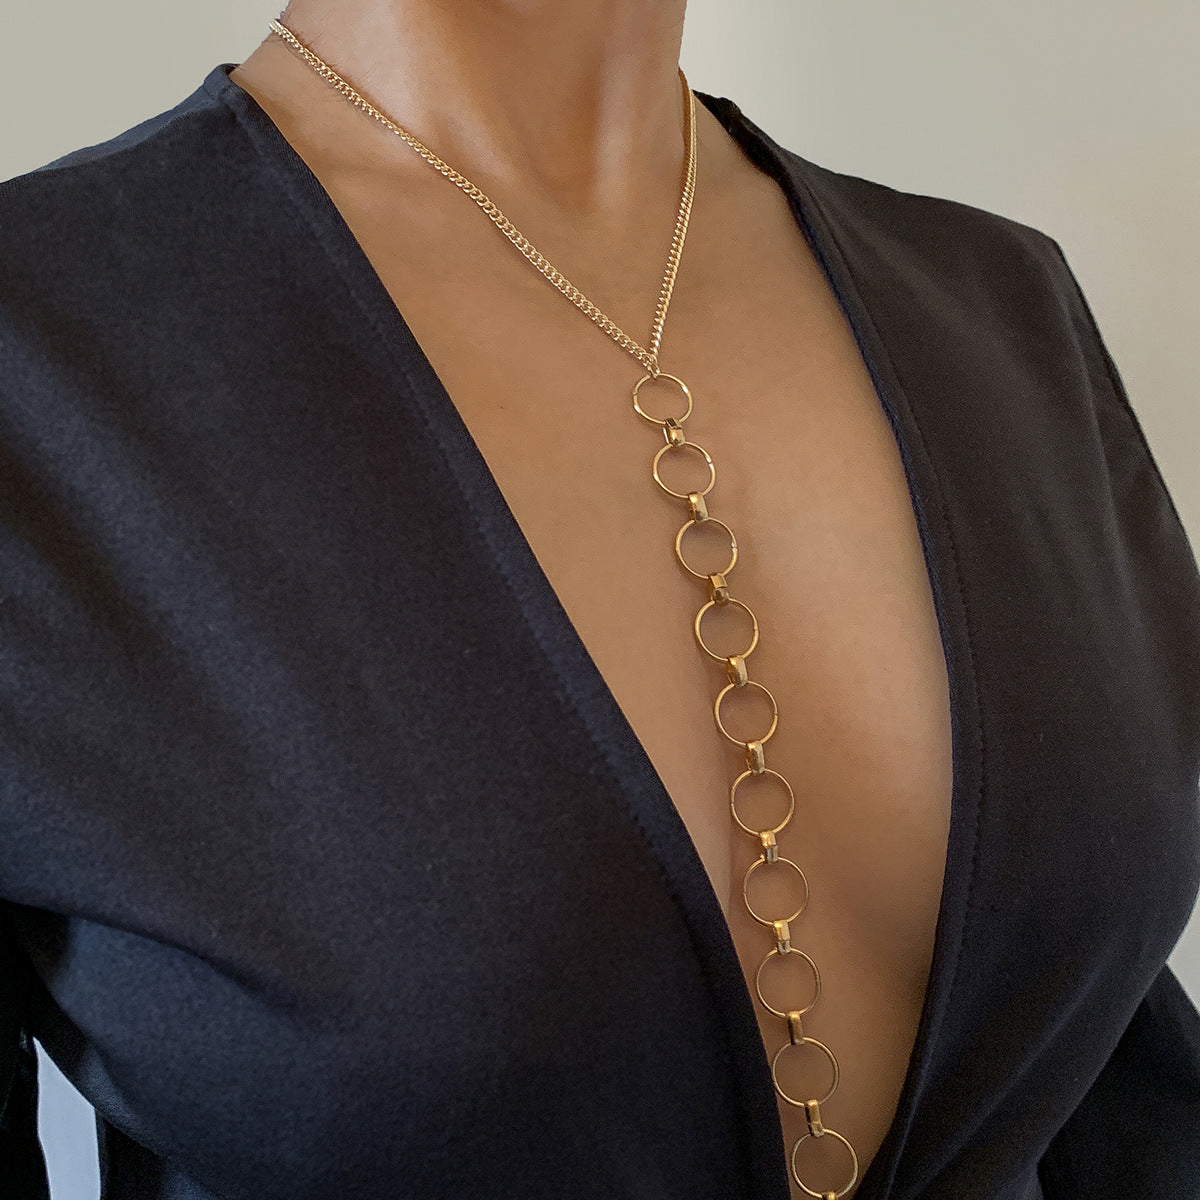 Women's Sexy Ring Chain Necklace Integrated Body Chain